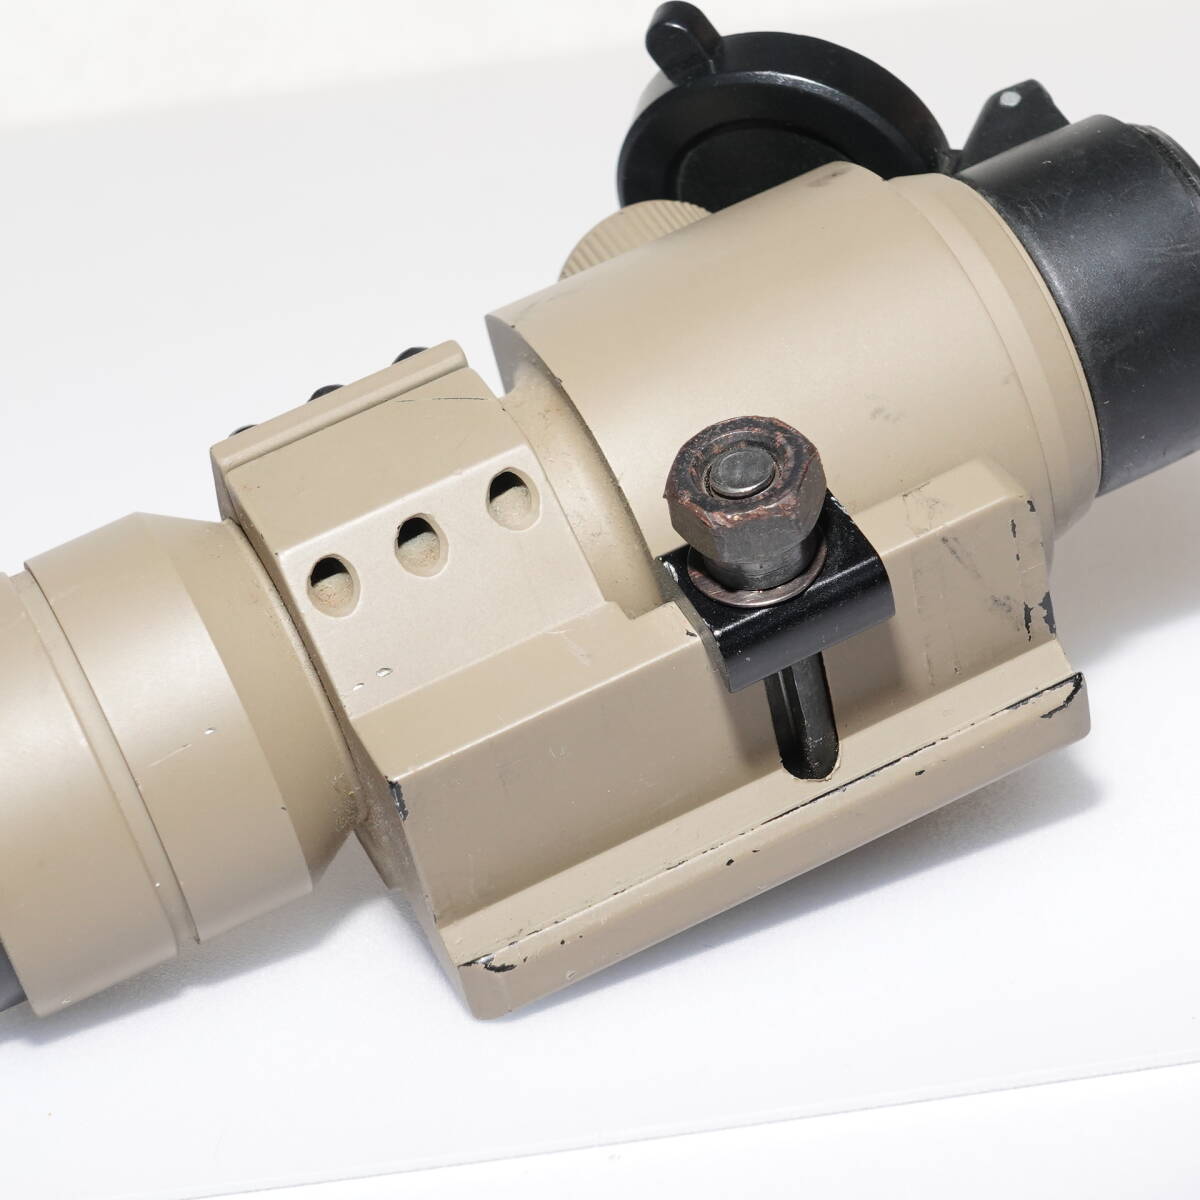  Manufacturers unknown dot site FDE Comp M2 type lighting verification settled 